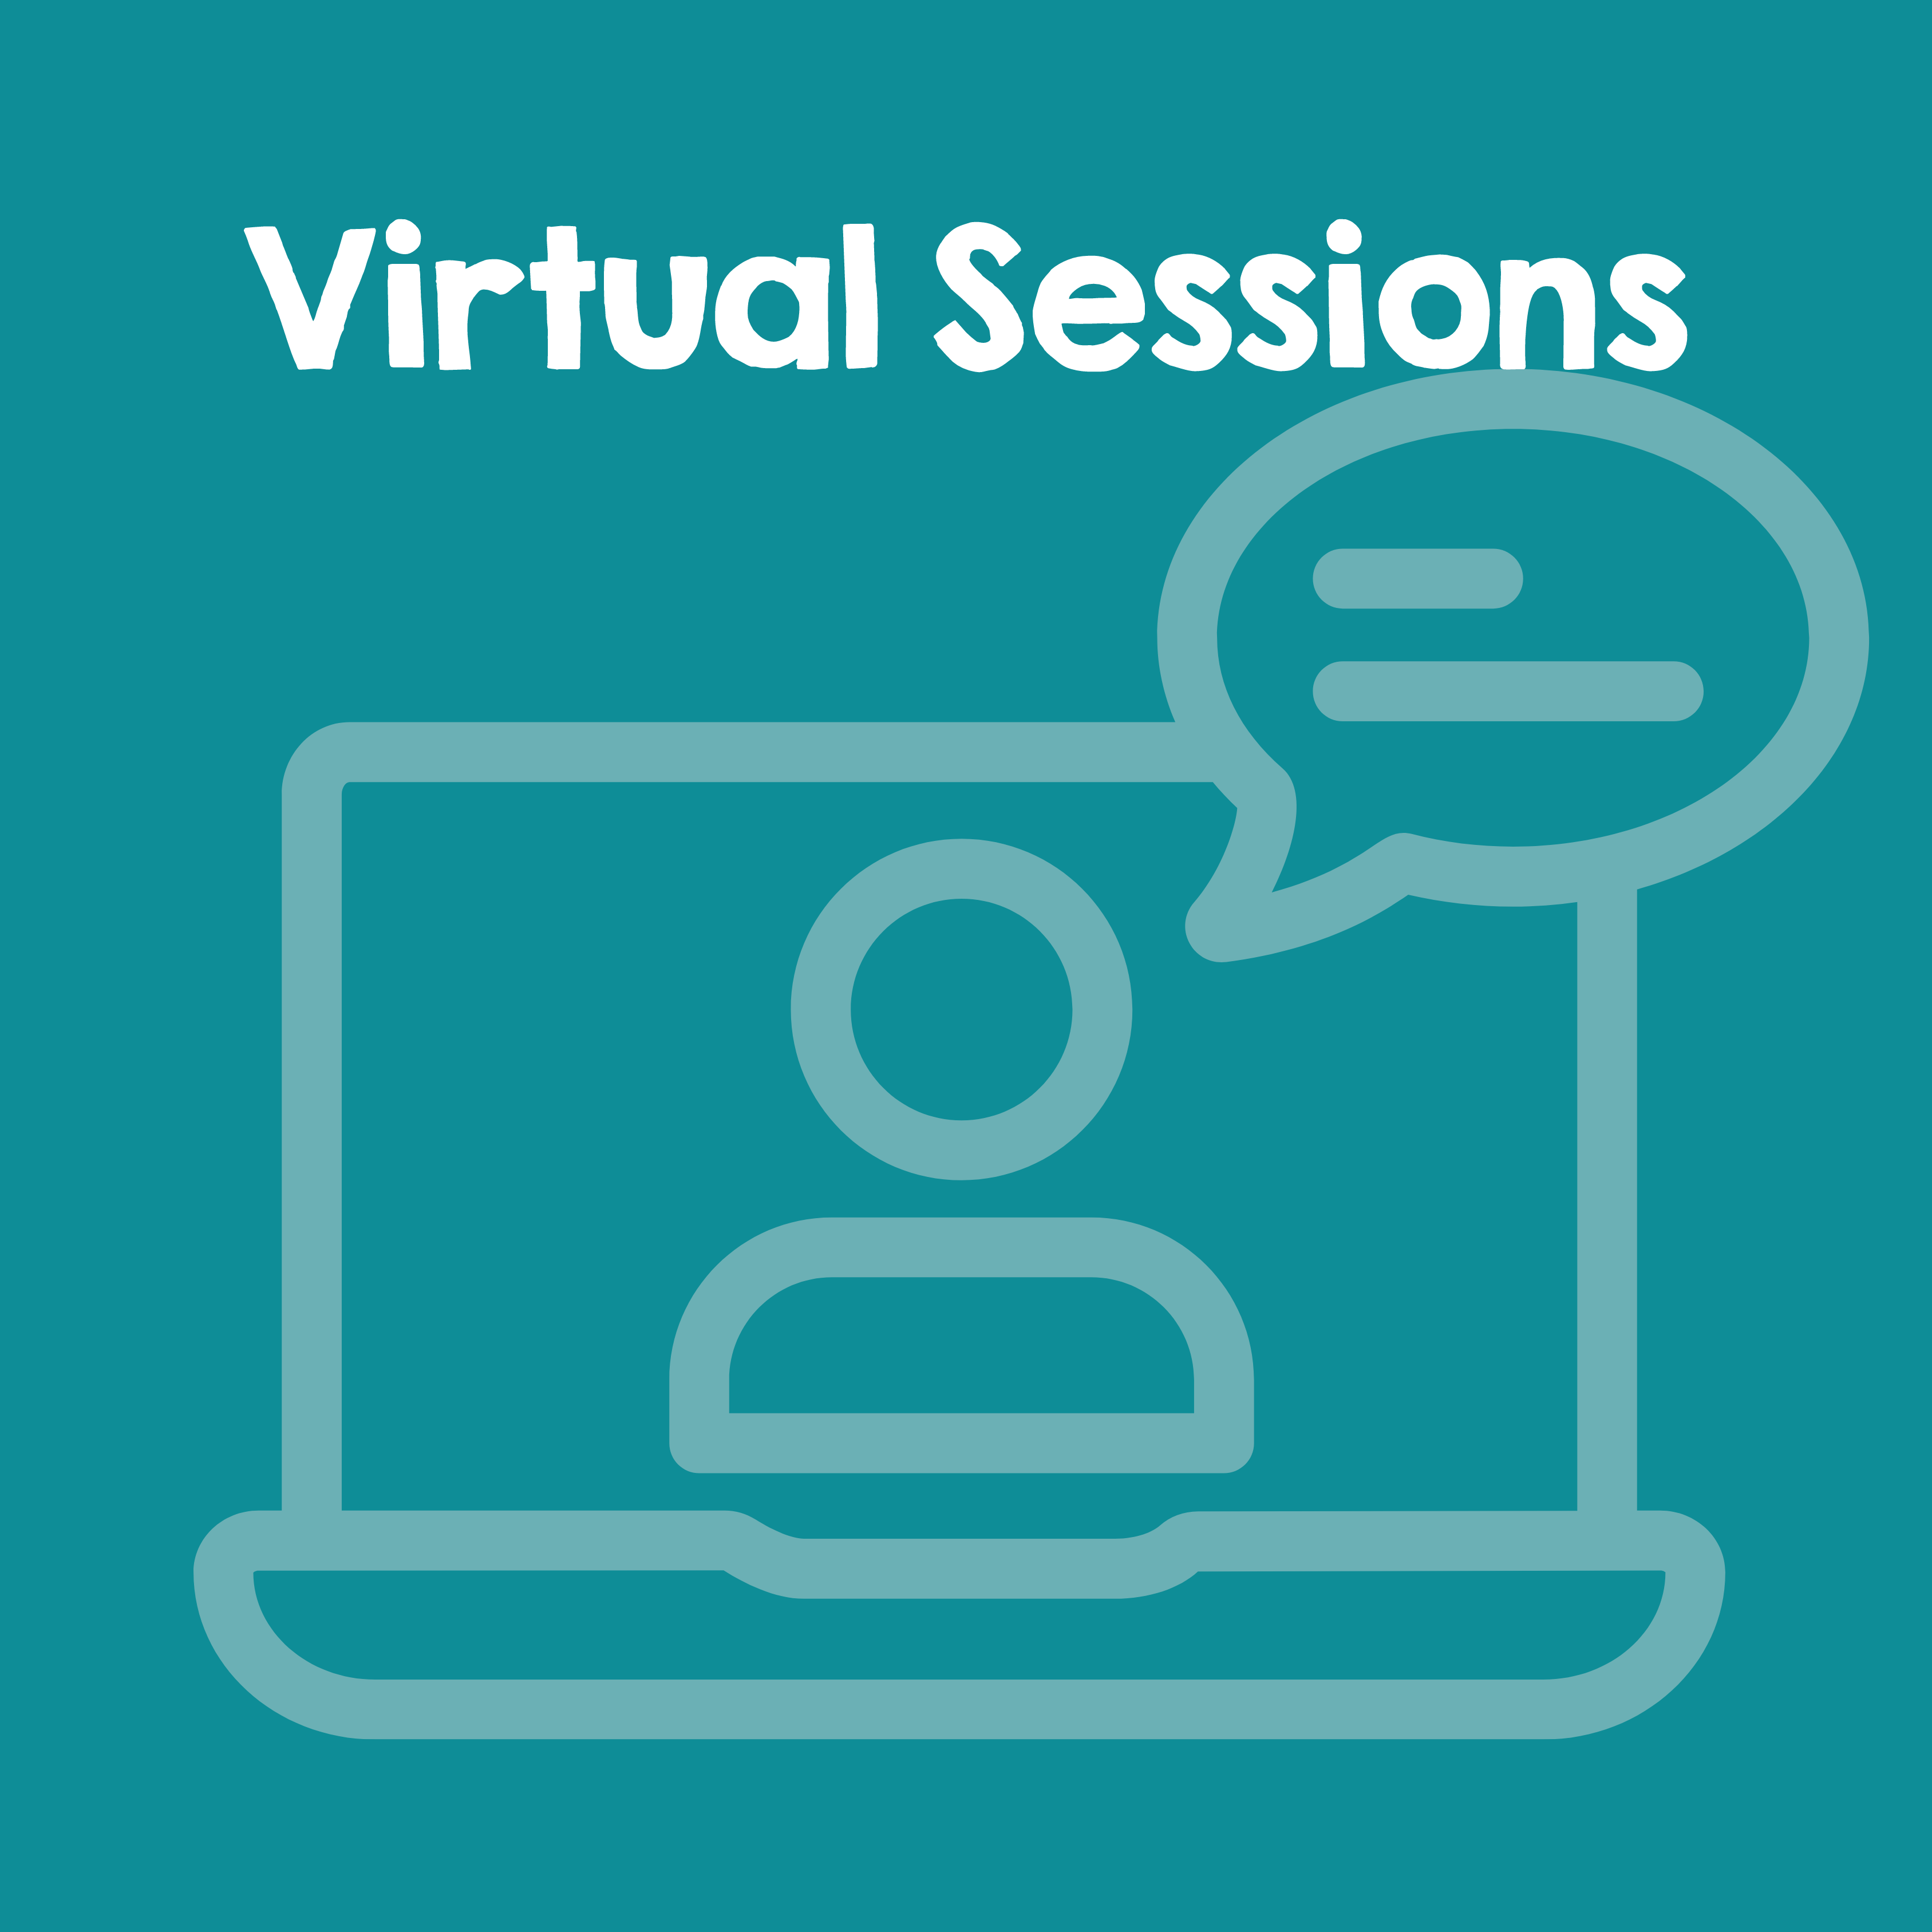 Virtual Sessions and graphic of laptop with person icon and speech bubble